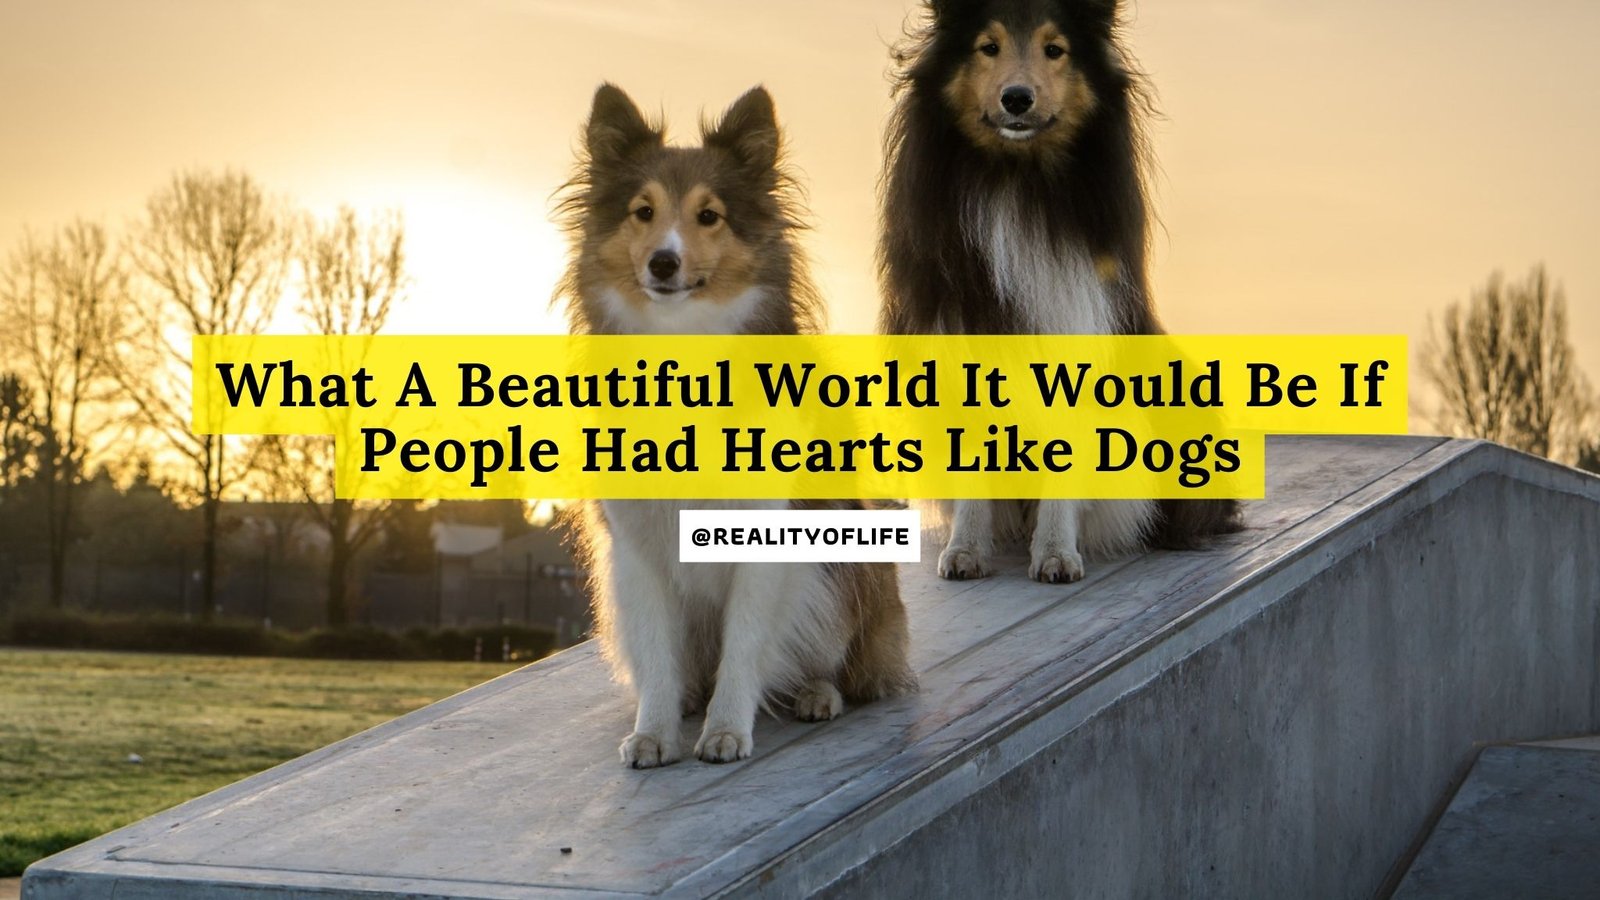 What A Beautiful World It Would Be If People Had Hearts Like Dogs